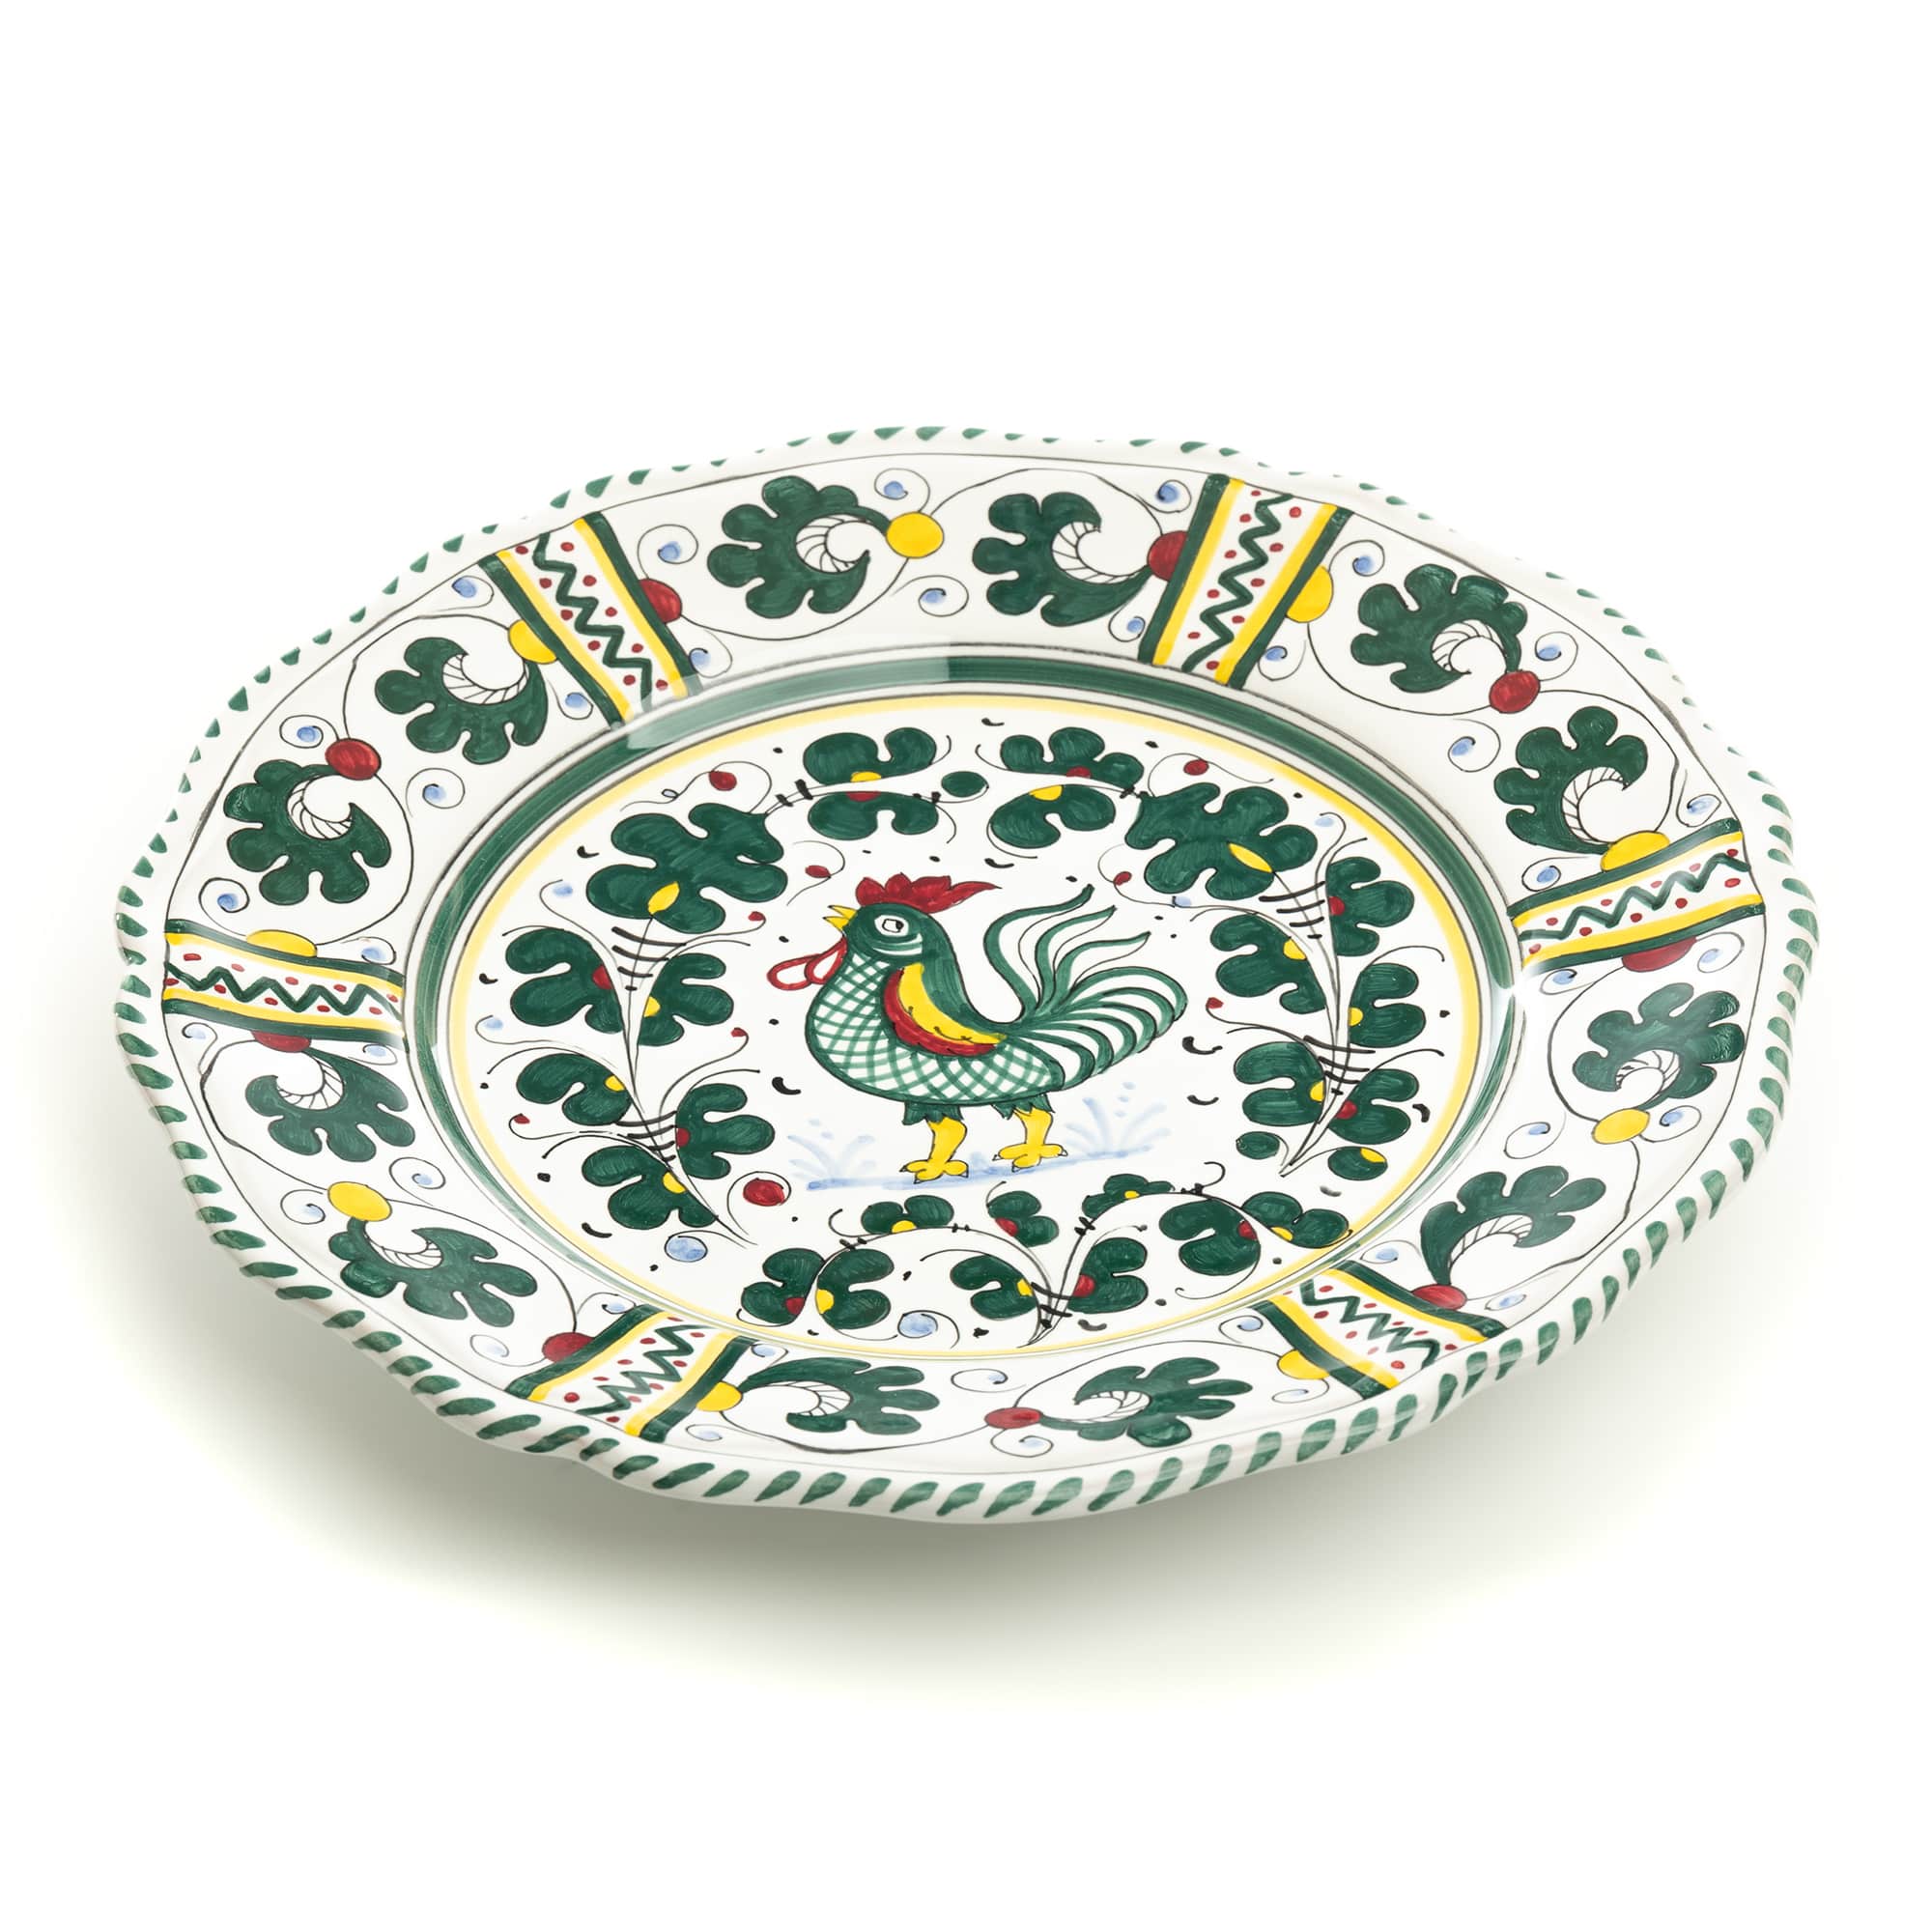 Orvieto Dinner Plate, Full Design - Set of 4, ceramics, pottery, italian design, majolica, handmade, handcrafted, handpainted, home decor, kitchen art, home goods, deruta, majolica, Artisan, treasures, traditional art, modern art, gift ideas, style, SF, shop small business, artists, shop online, landmark store, legacy, one of a kind, limited edition, gift guide, gift shop, retail shop, decorations, shopping, italy, home staging, home decorating, home interiors